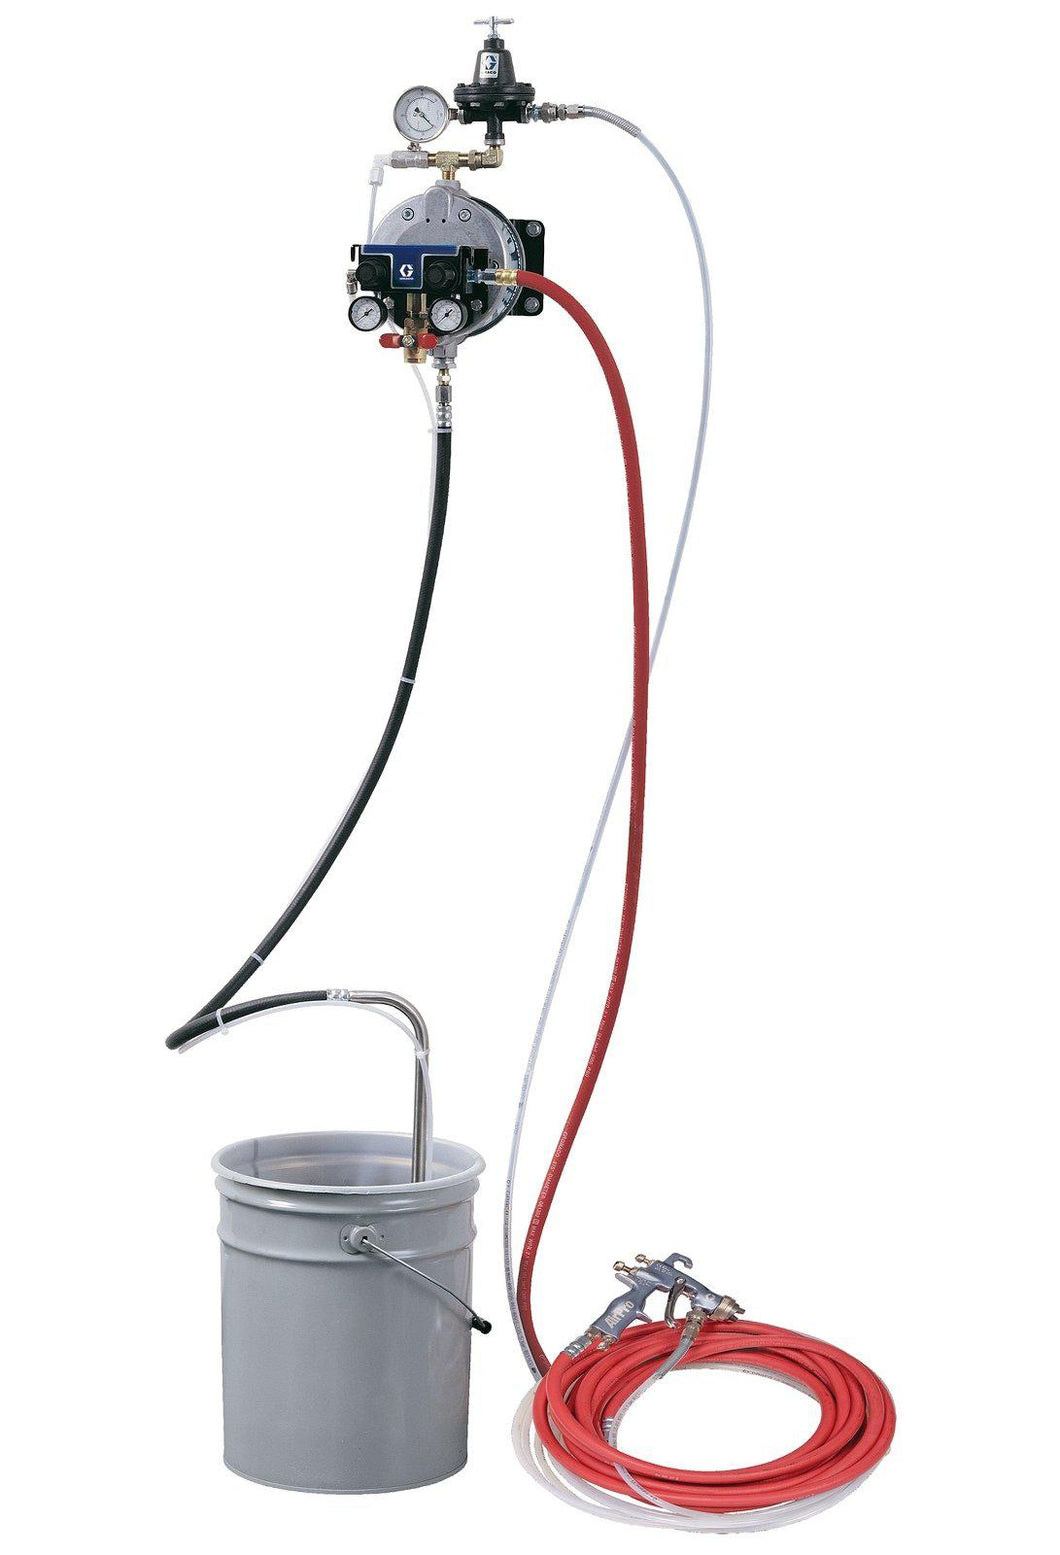 Triton SST AirPro Waterbourne Application Package 100 PSI @ 8.5 GPM  Air-Powered Sprayer - Wall Mount